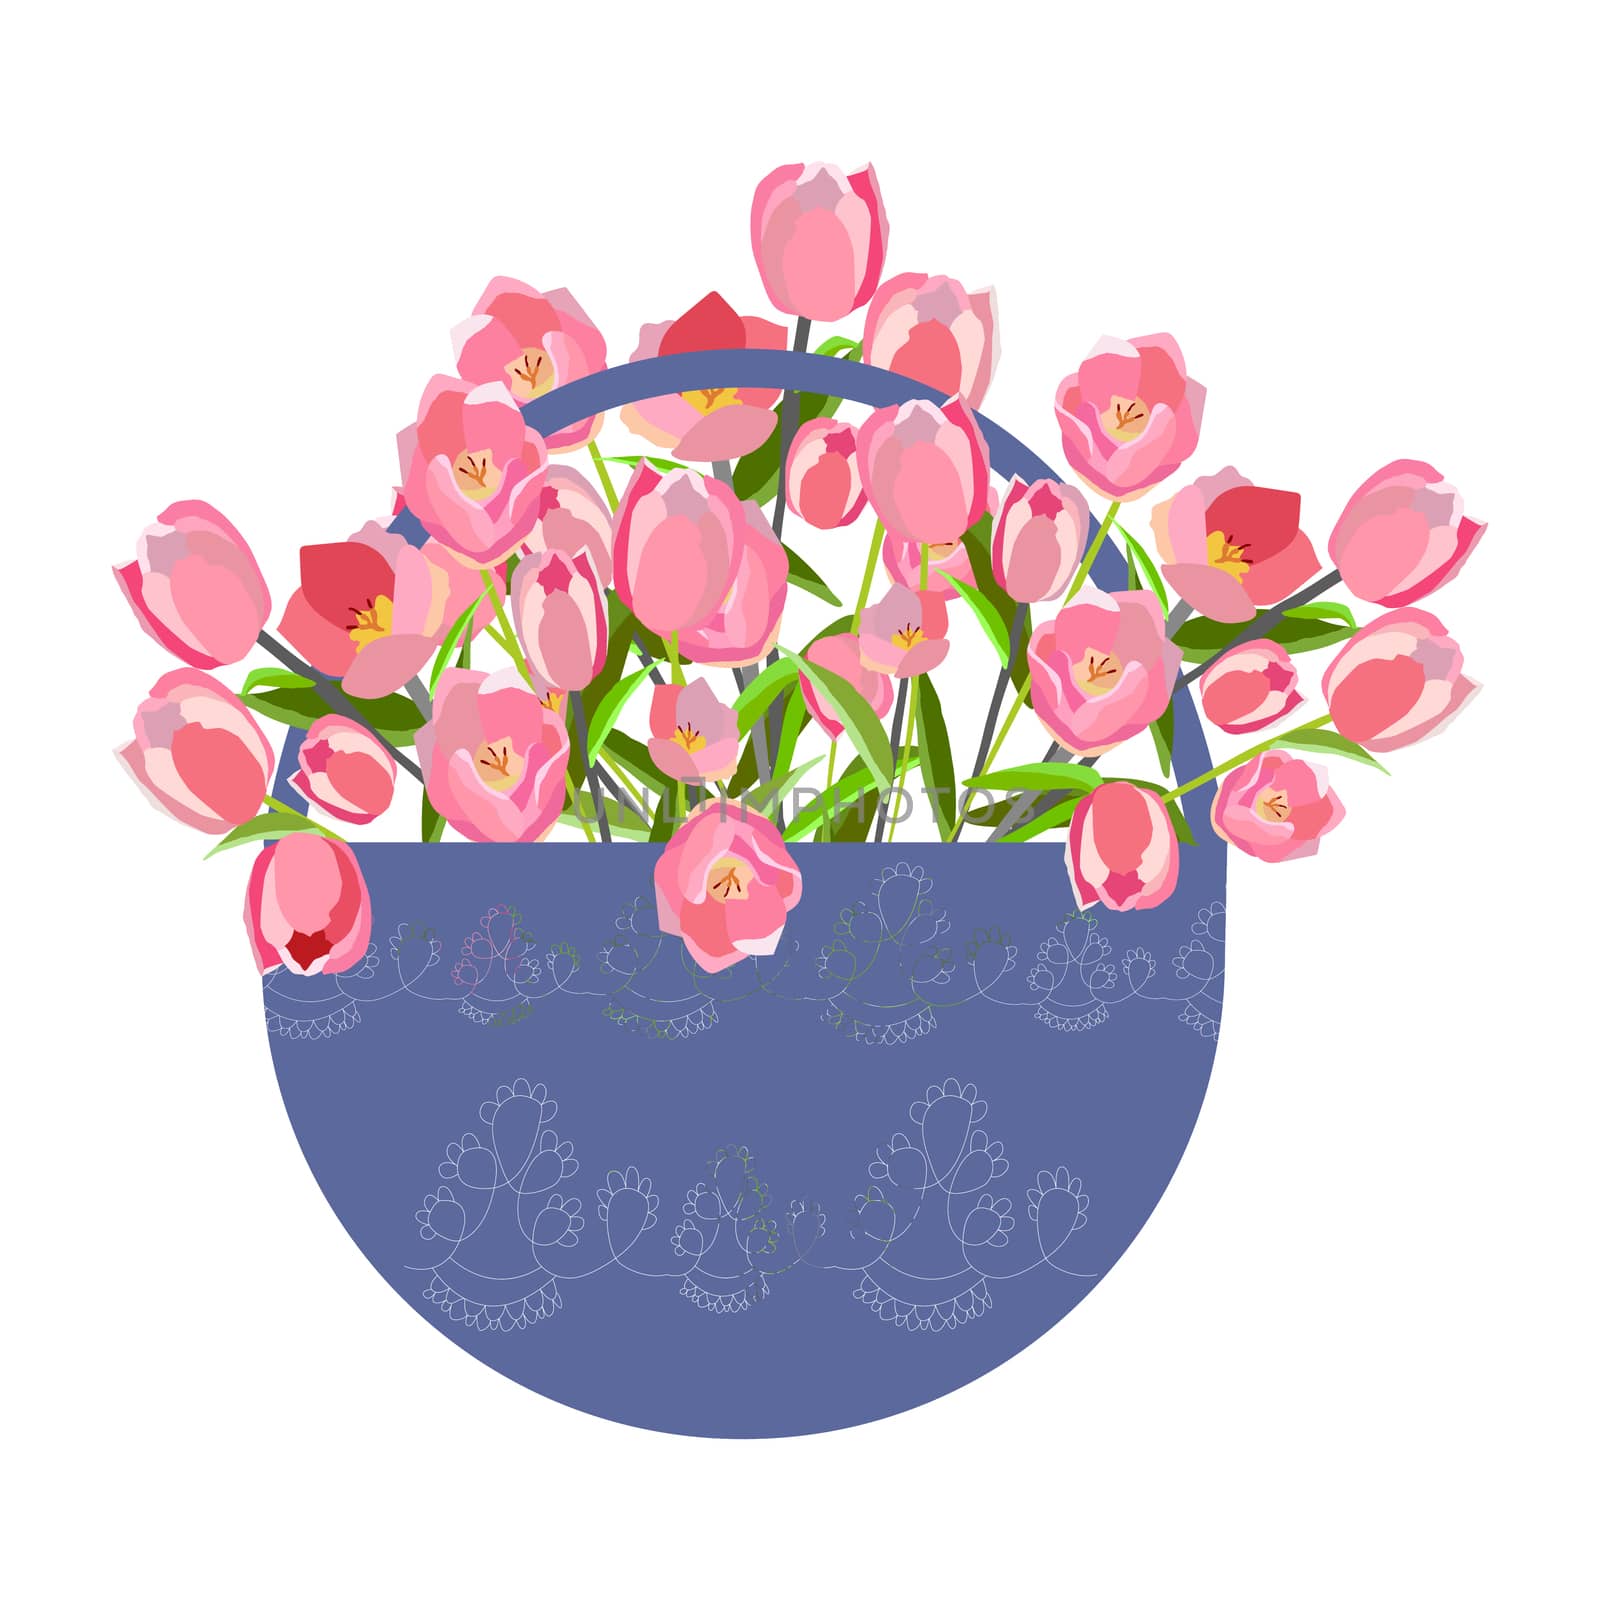 Beautiful blue basket with pink tulips on white background. Isolated poster design element. Vector illustration.